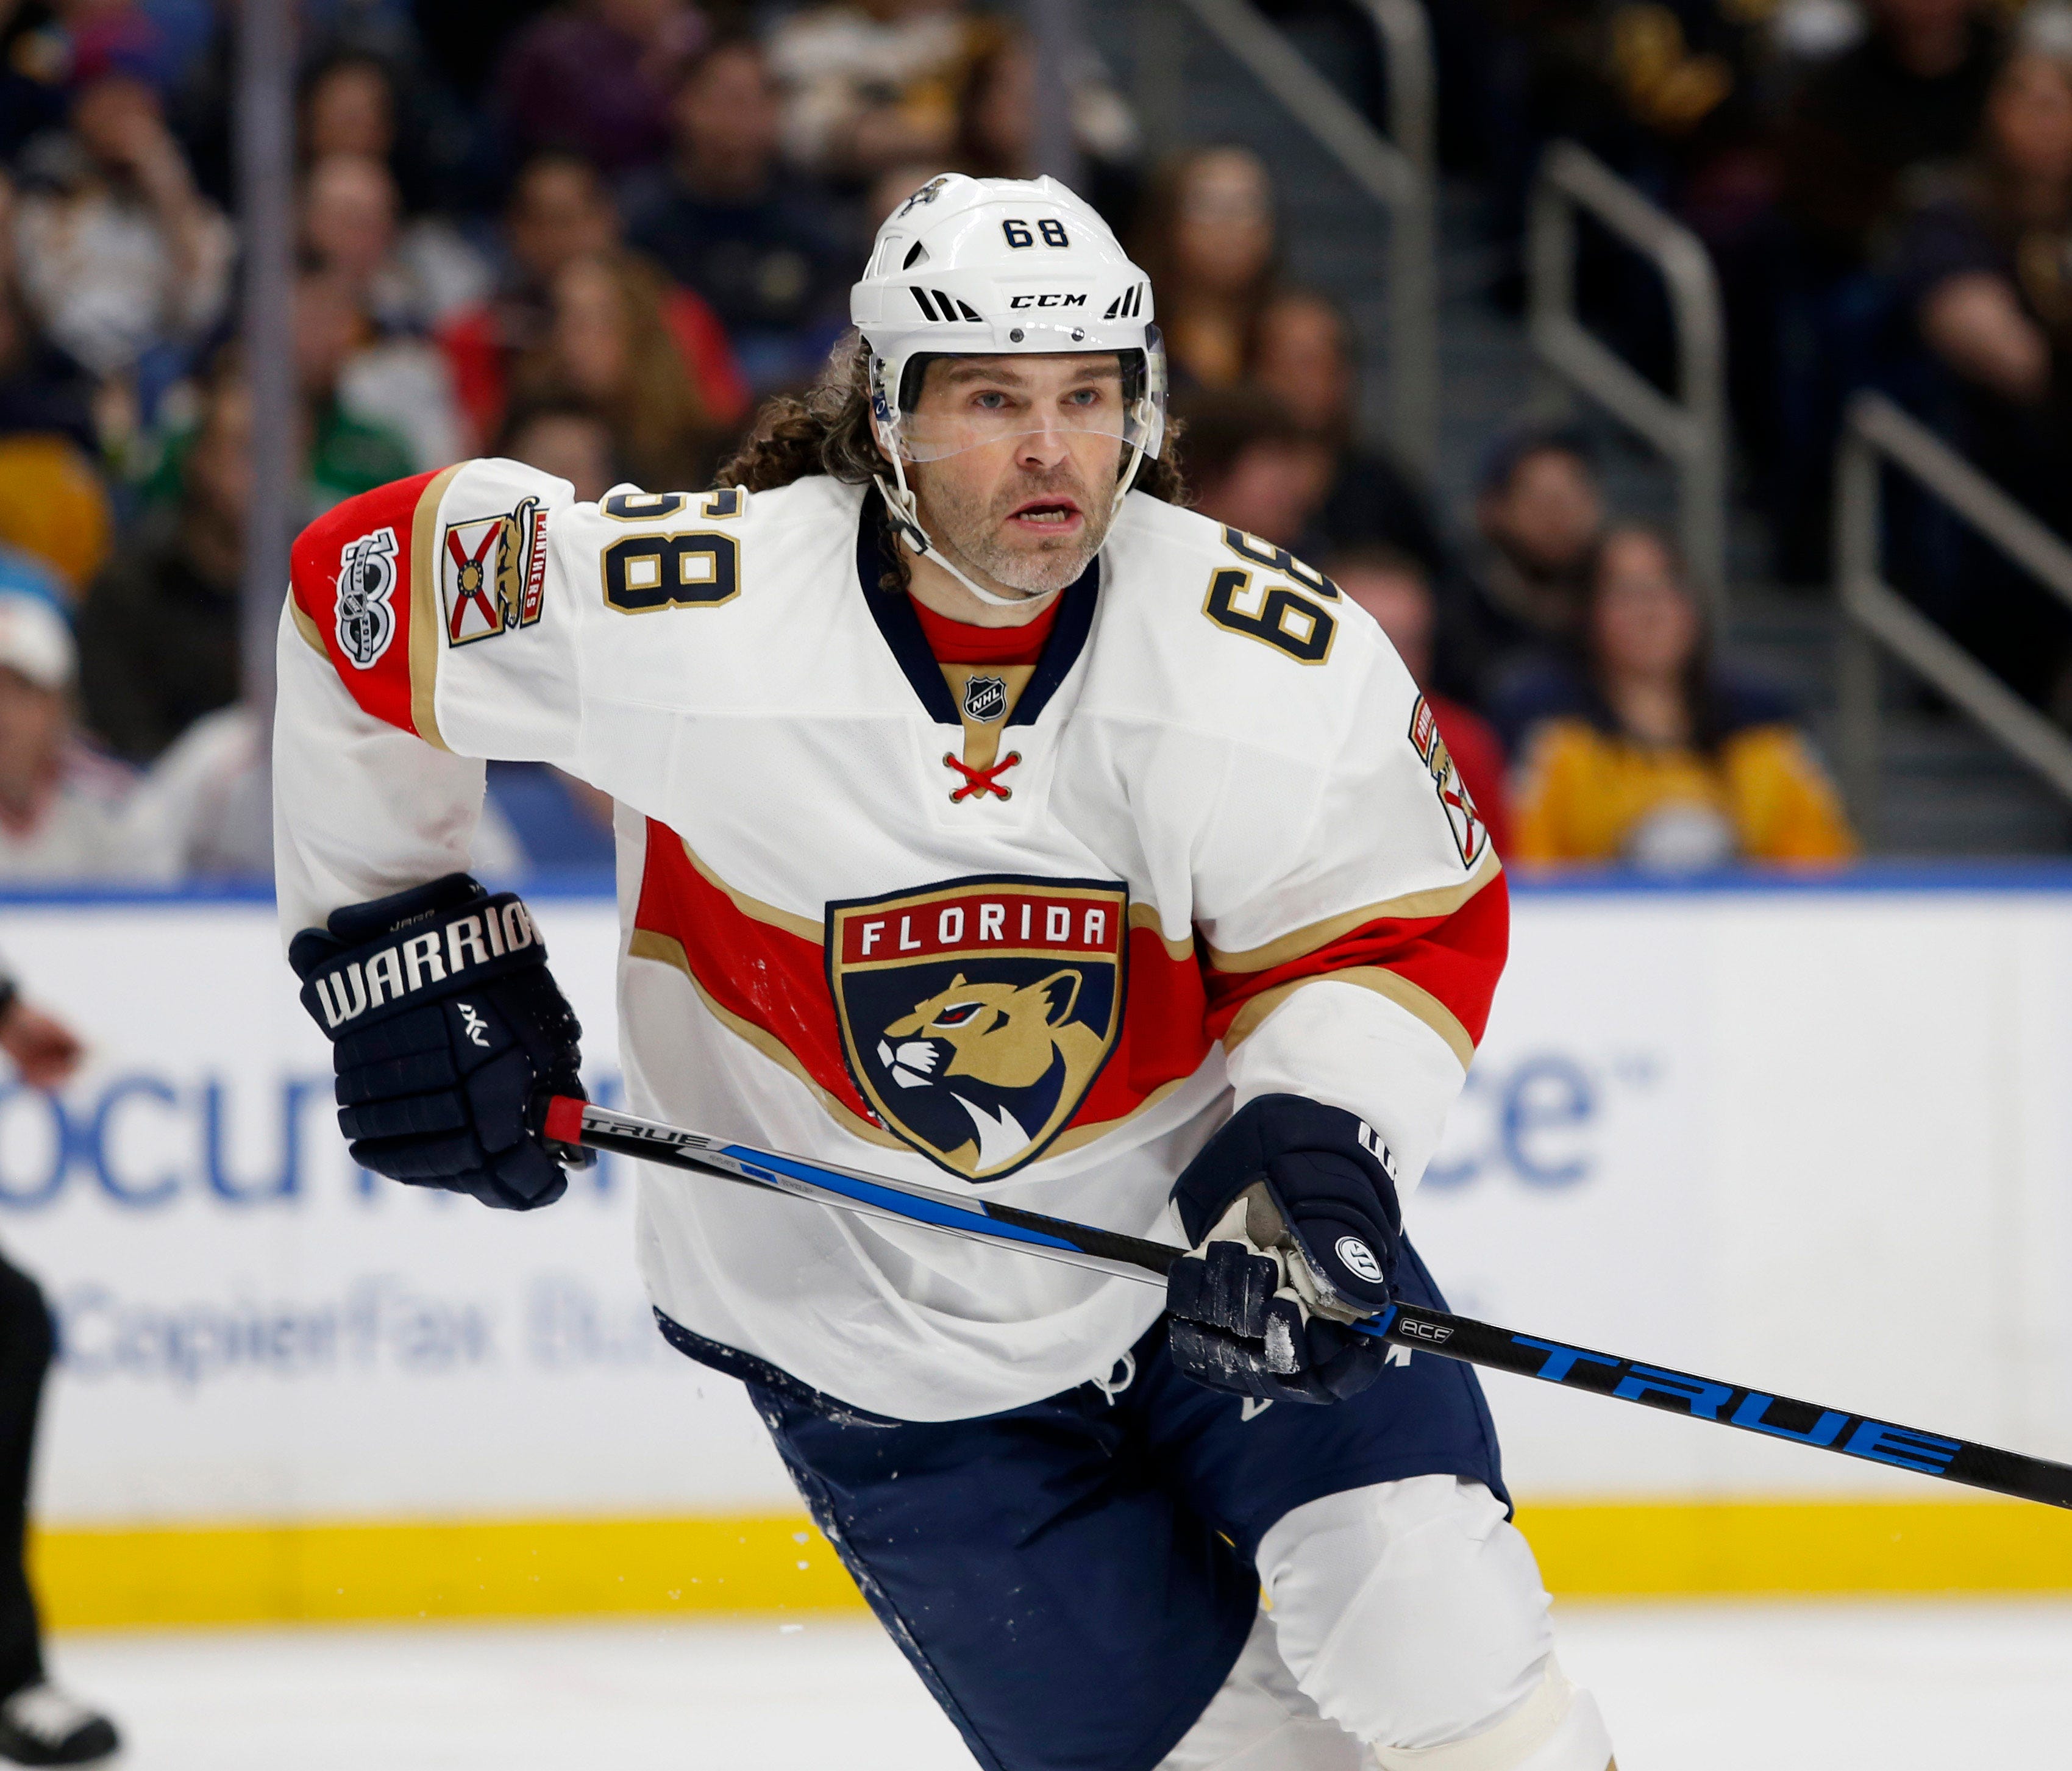 Jaromir Jagr is set to take his talents to Canada to play for the Calgary Flames.